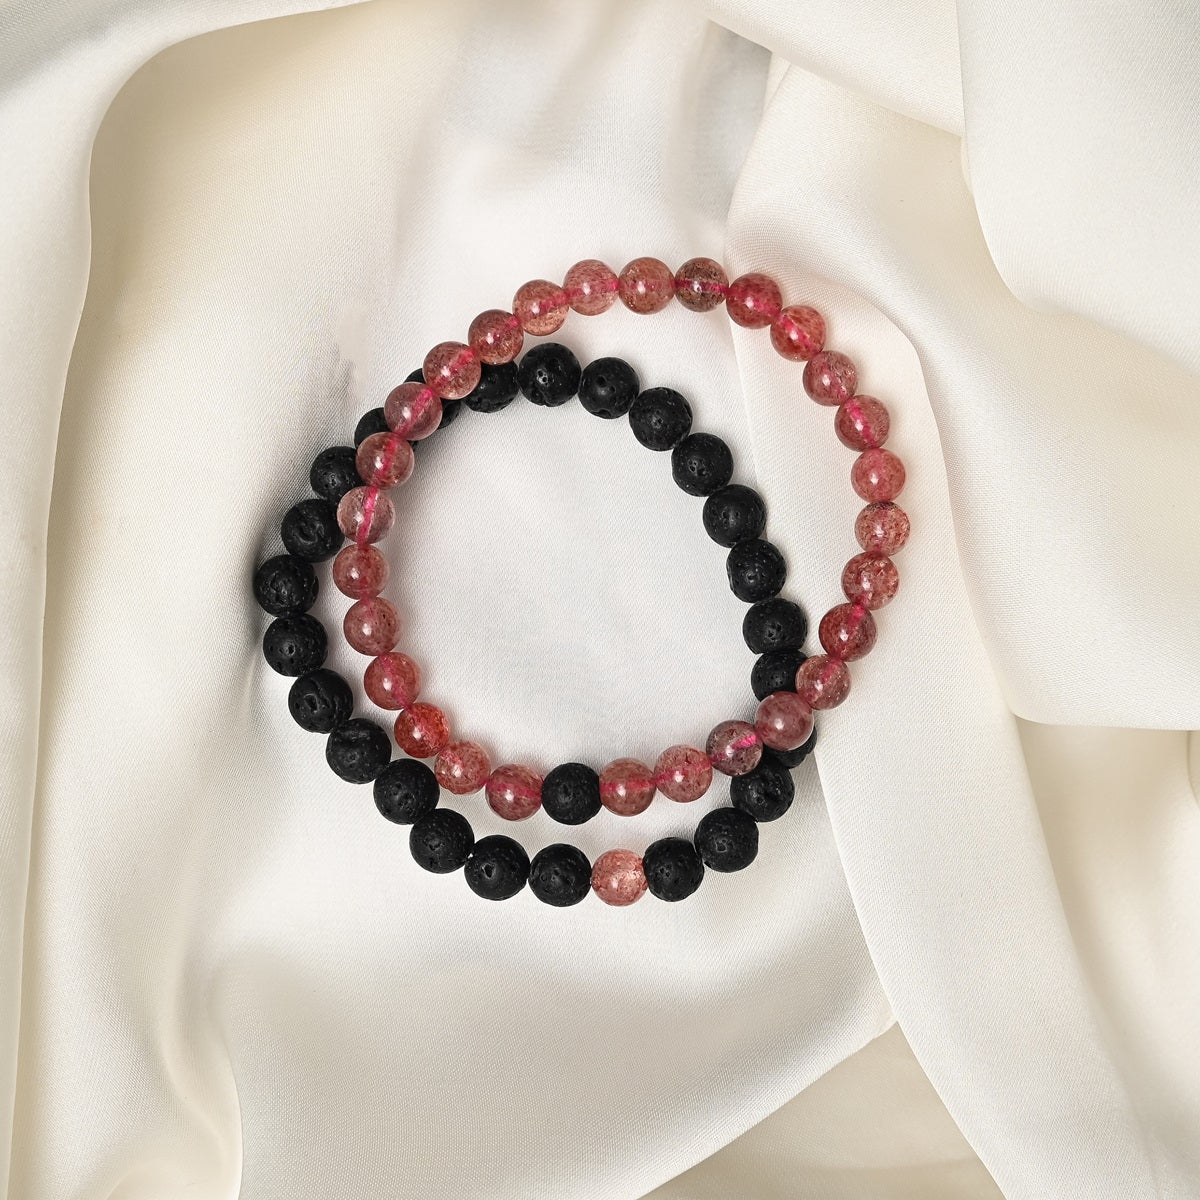 Detailed close-up showcasing the intricate beauty of Strawberry Quartz's red tones and the contrasting black Lava gemstones.